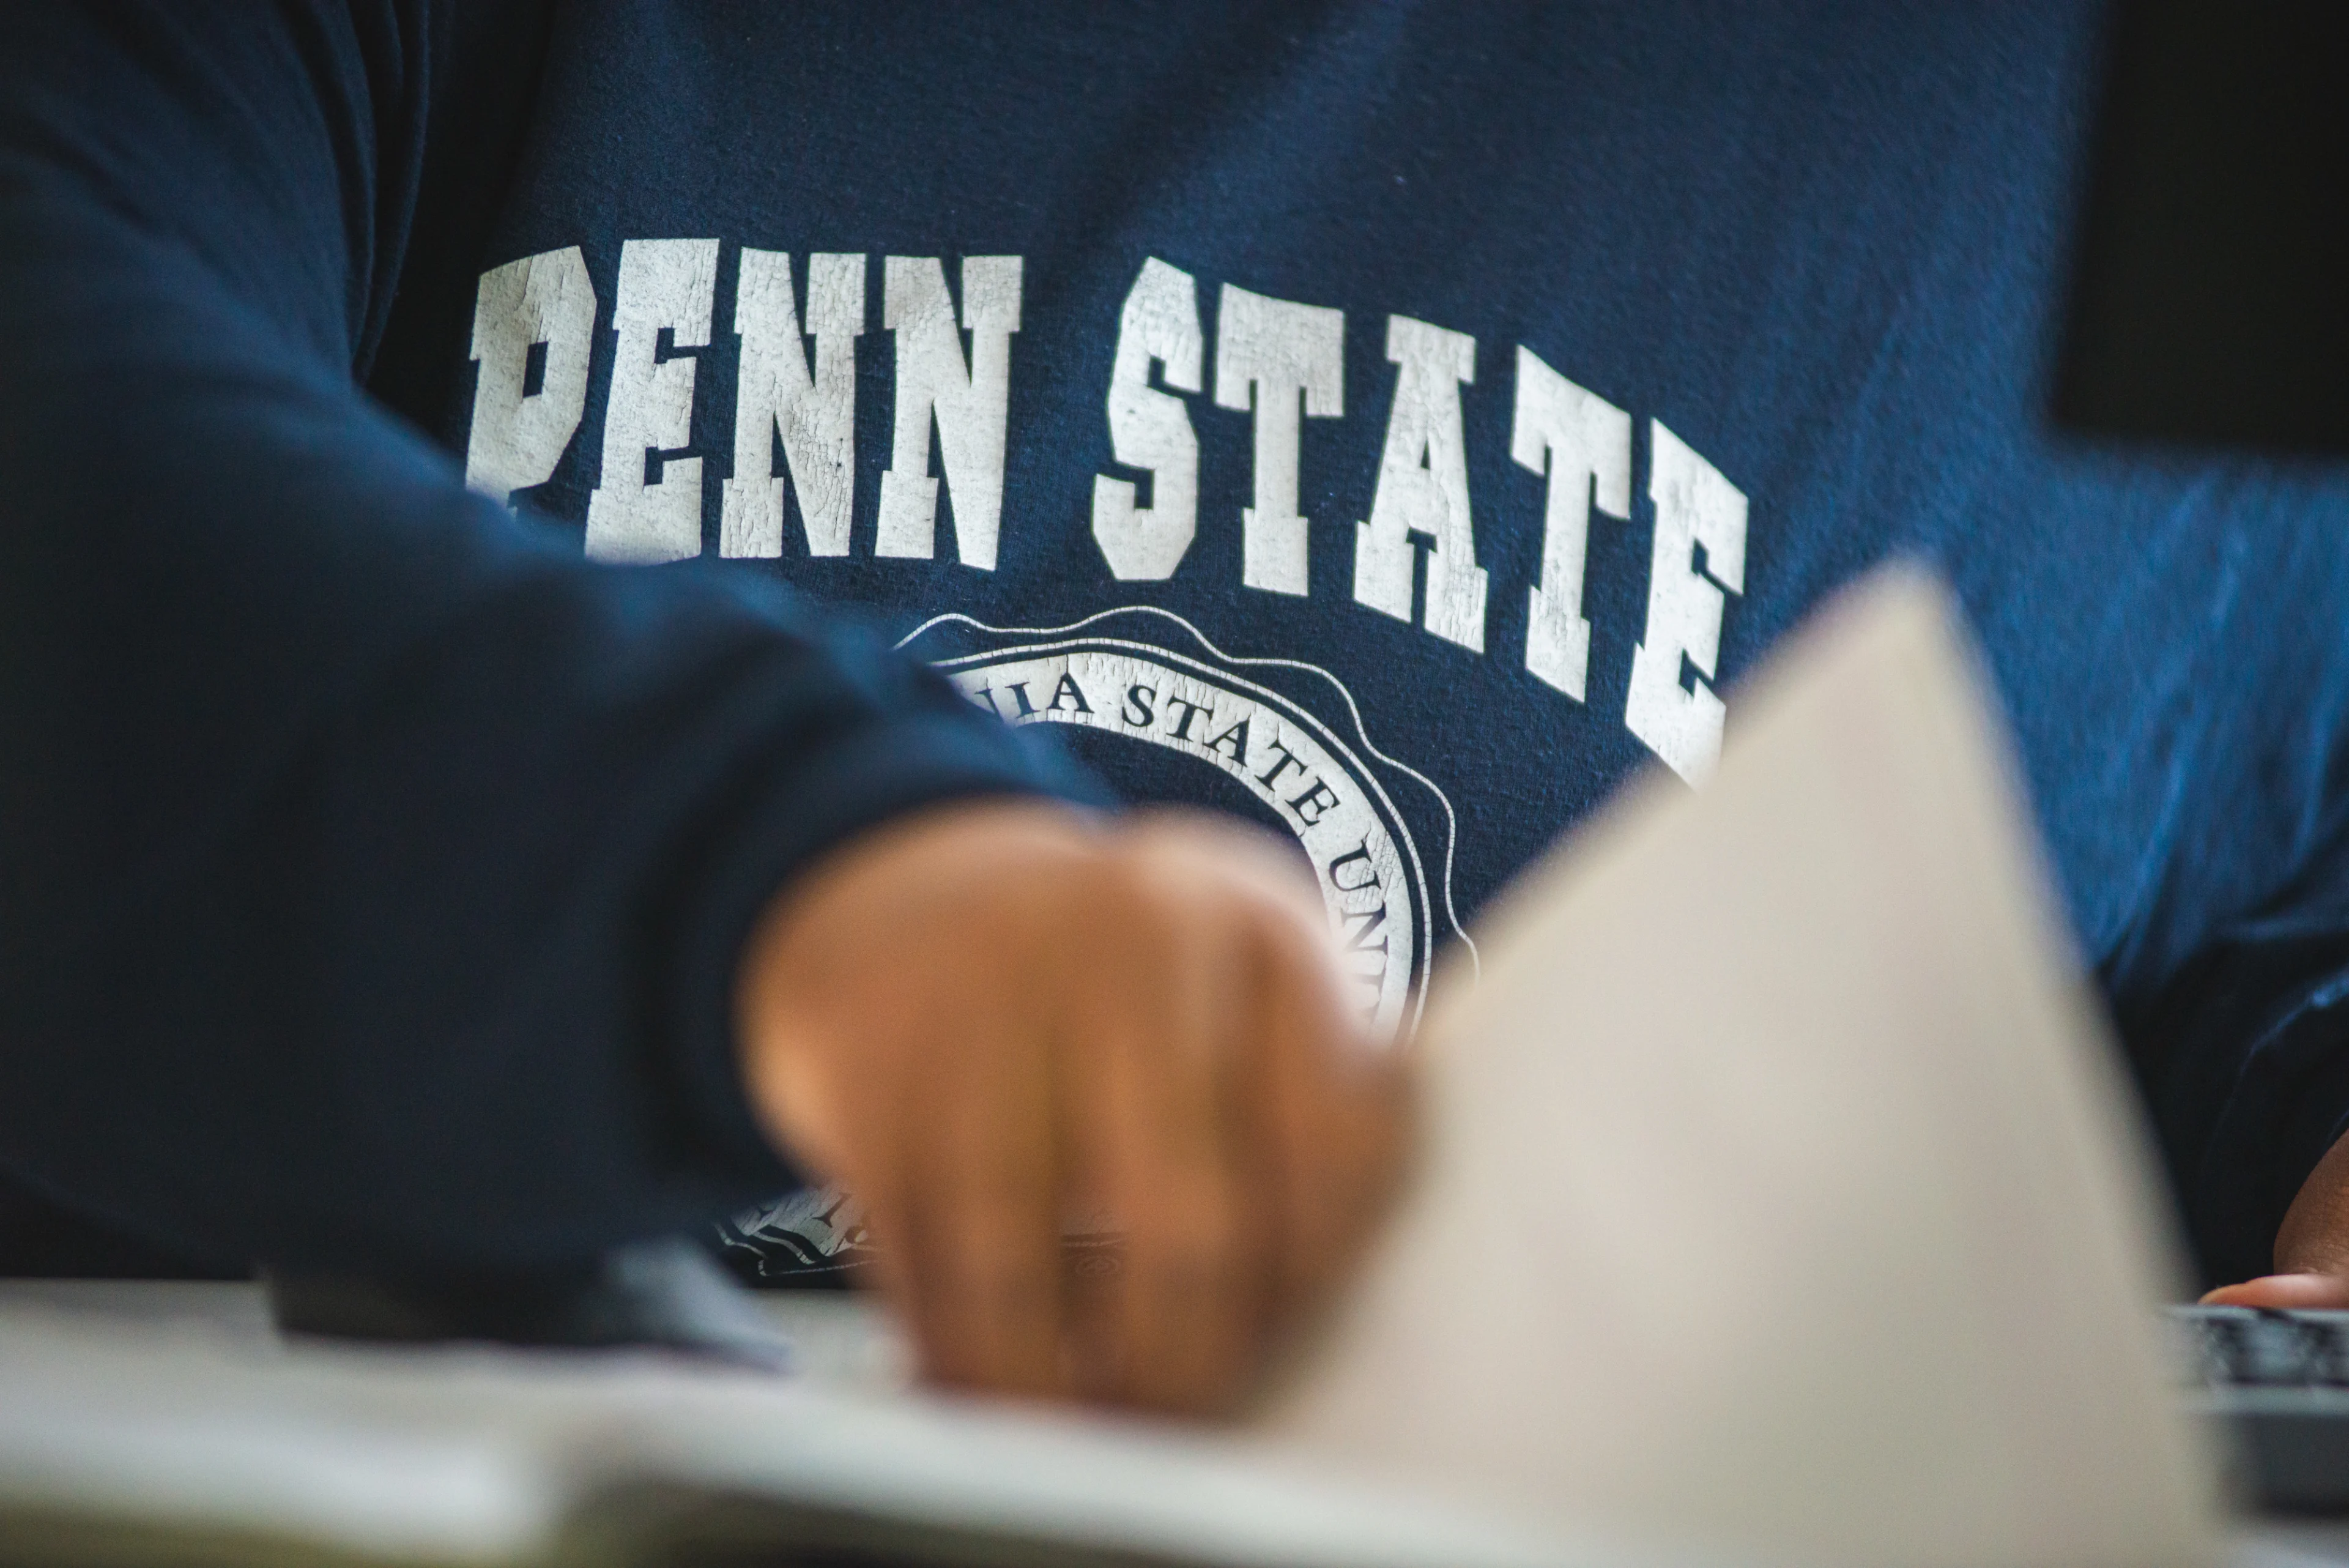 Student shirt with Penn State printed on front.